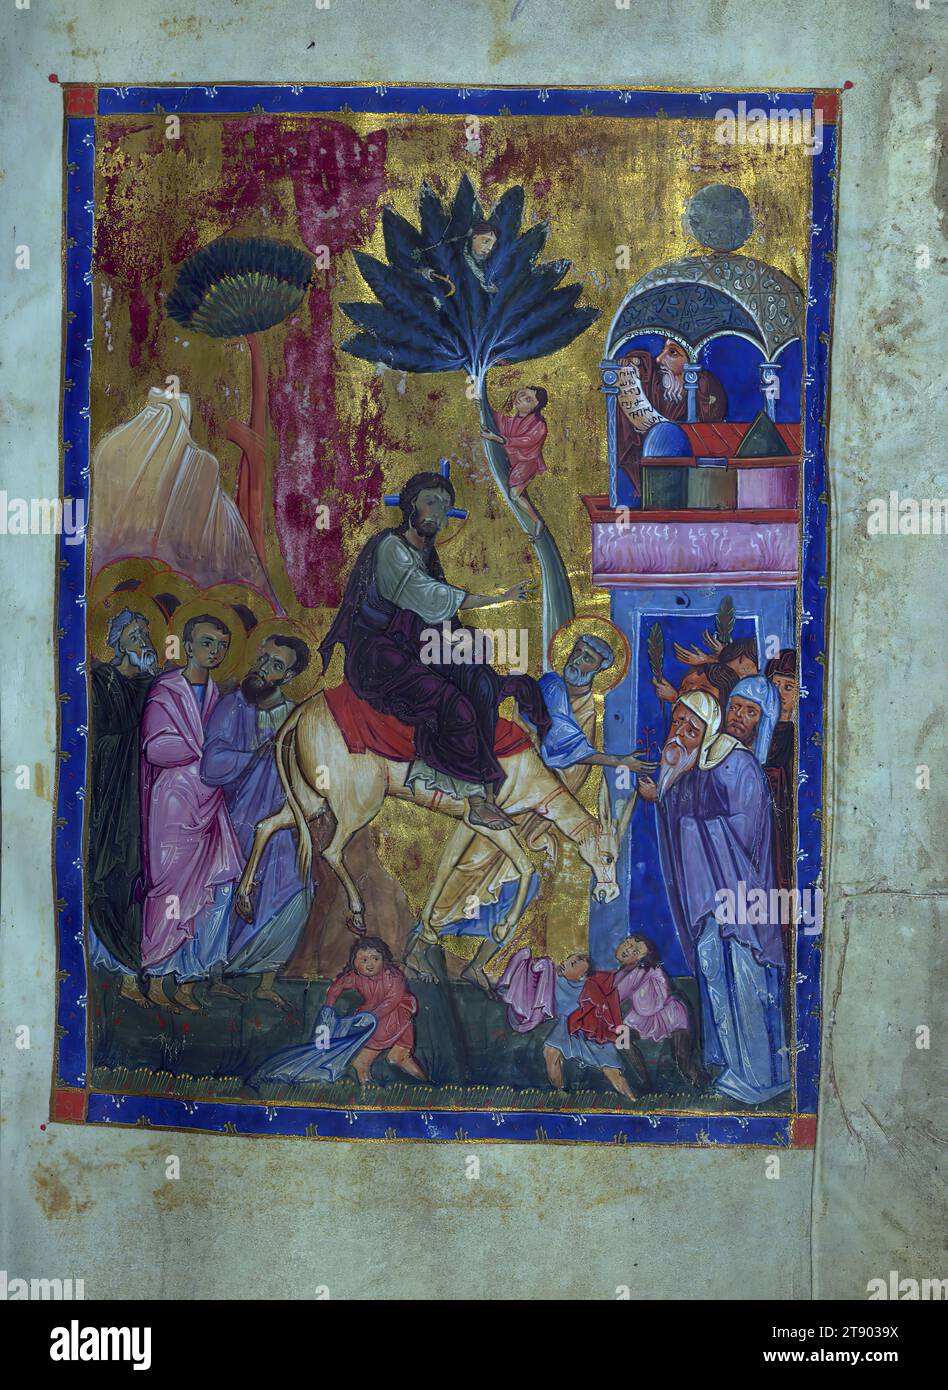 T'oros Roslin Gospels, Entry into Jerusalem, This manuscript was made in 1262 by T’oros Roslin, an extremely prominent illuminator, who extended the range of manuscript illuminations by introducing a whole cycle of images into the gospels rather than, as was traditional, only including the portraits of the evangelists. This particular manuscript was created at the scriptorium of Hromkla, which became the leading artistic center of Armenian Cilicia under the rule of catholicos Constantine I (1221-1267) Stock Photo